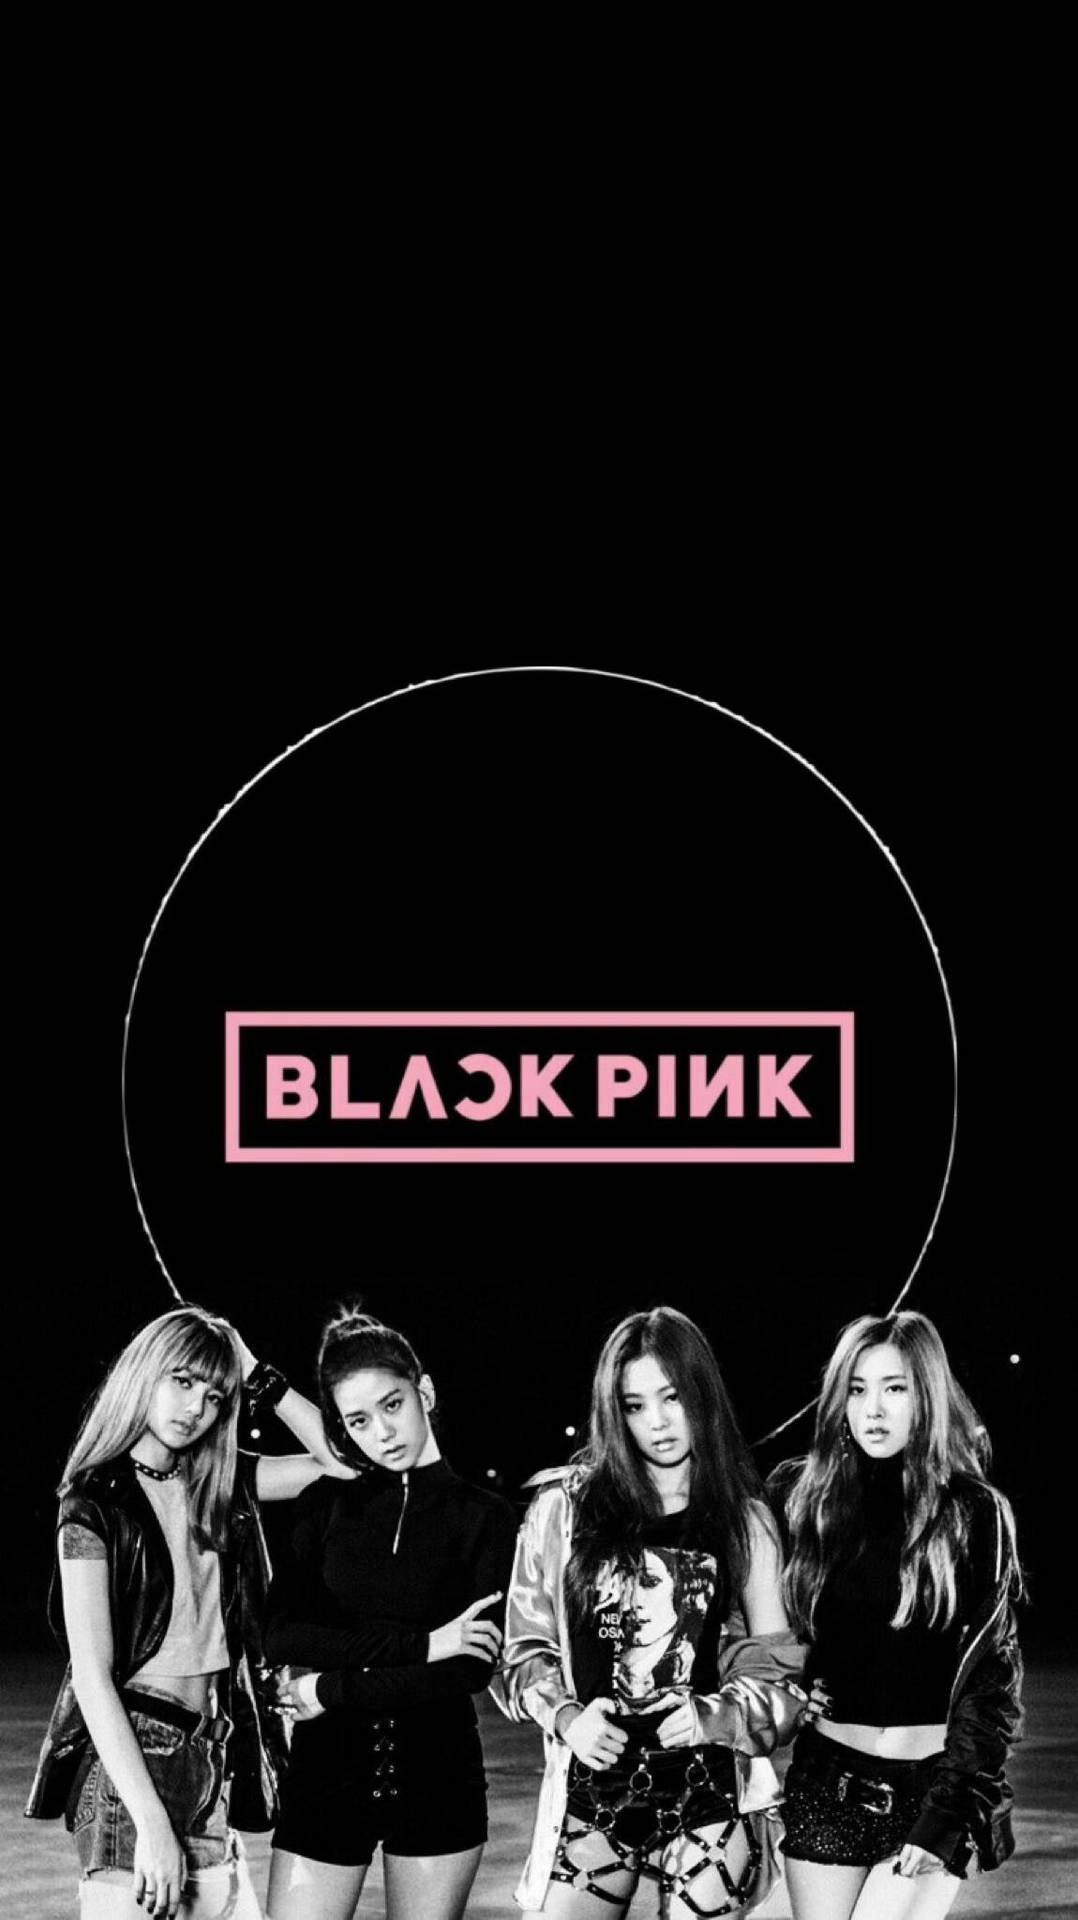 Blackpink Members And Logo In Ring Background